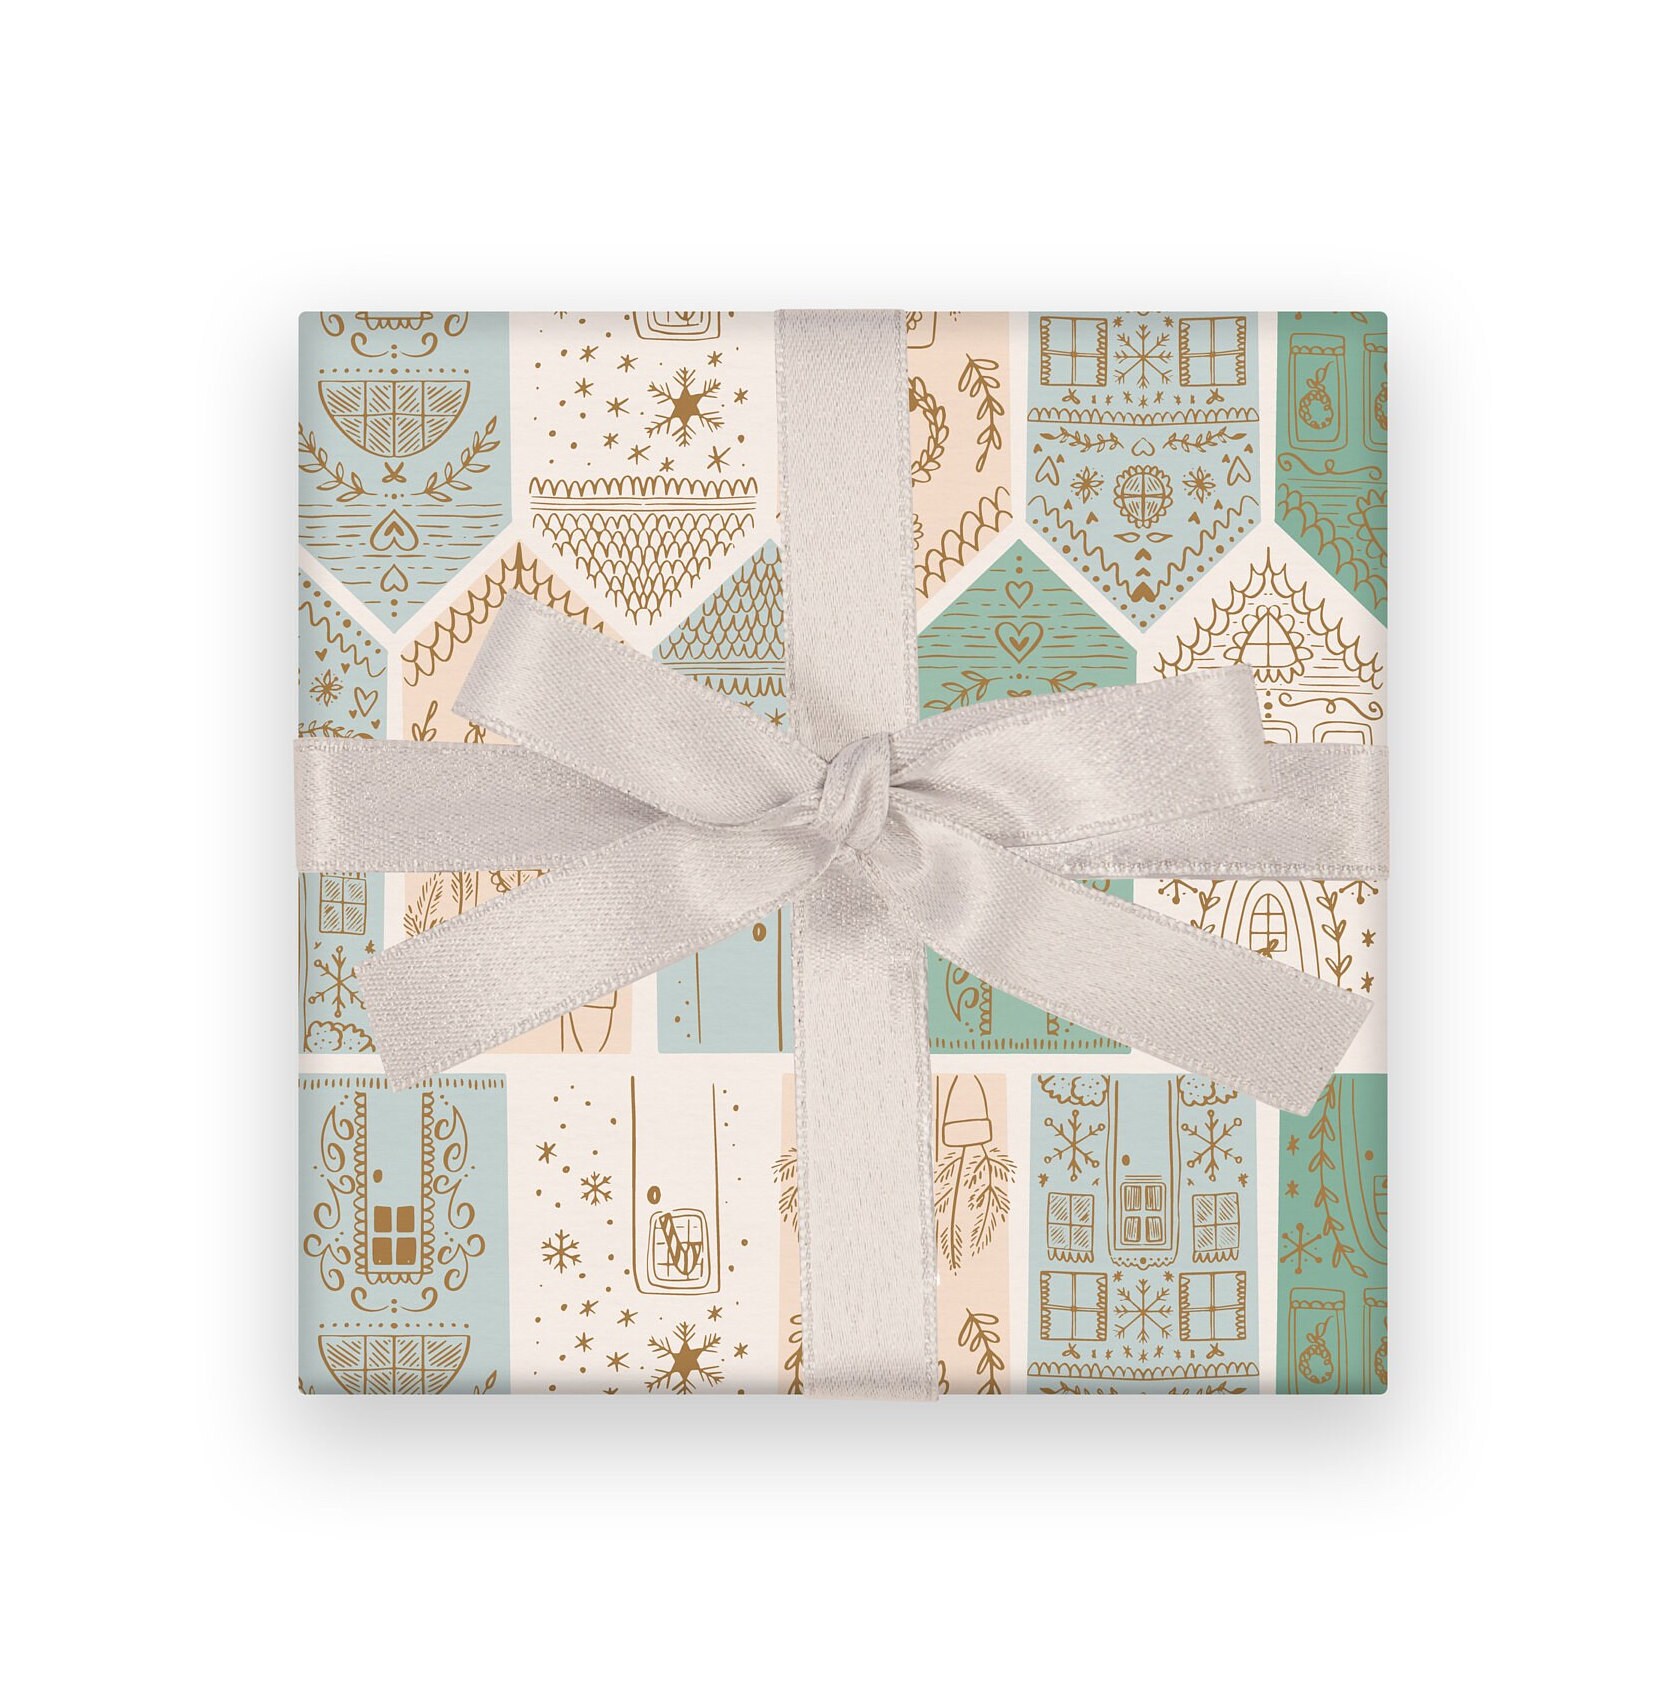 Gingerbread House Wrapping Paper Christmas Gift Wrap Pretty Wrapping Paper  30 X 36 Sheet 